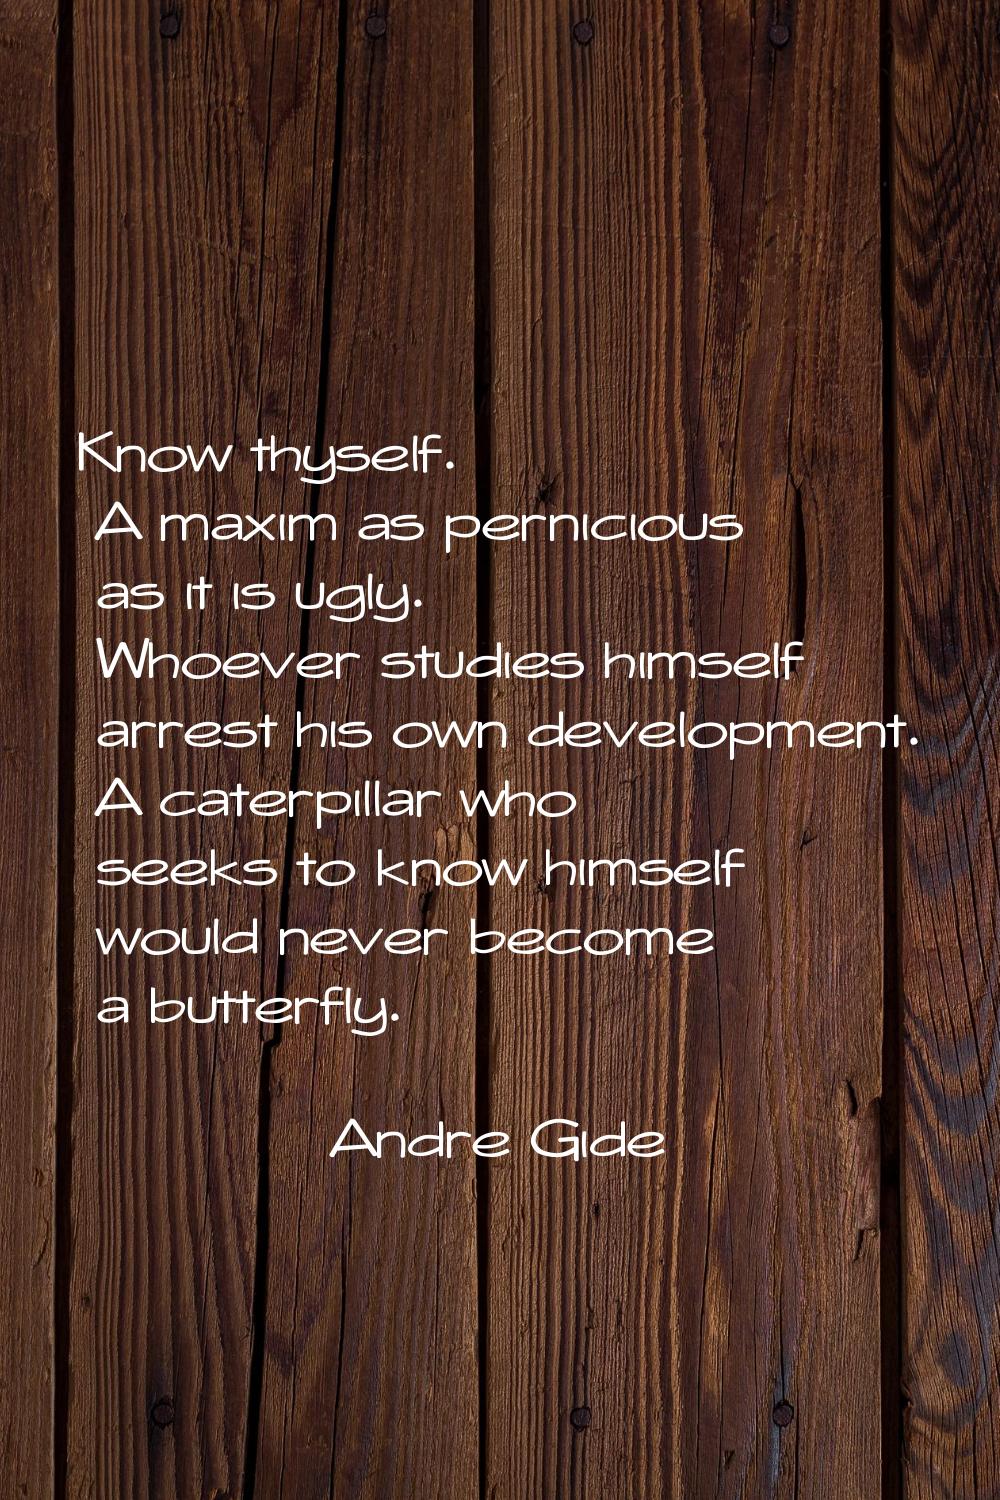 Know thyself. A maxim as pernicious as it is ugly. Whoever studies himself arrest his own developme